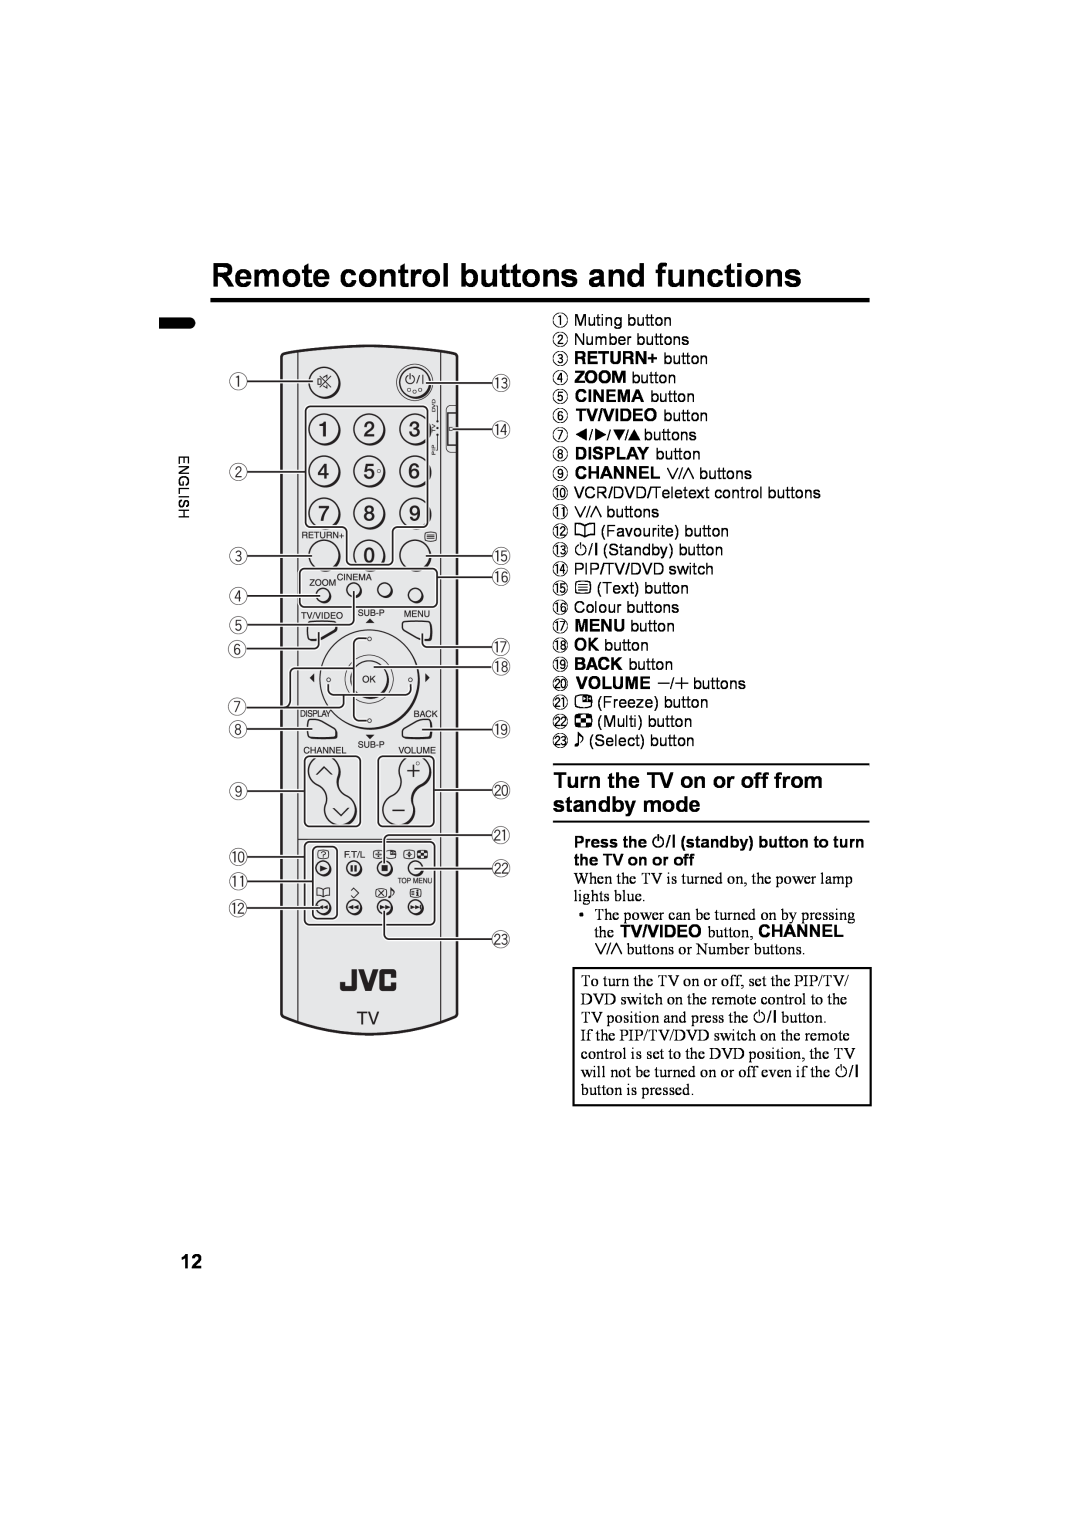 JVC 1004MKH-CR-VP, LCT1774-001A manual Remote control buttons and functions, Turn the TV on or off from standby mode 